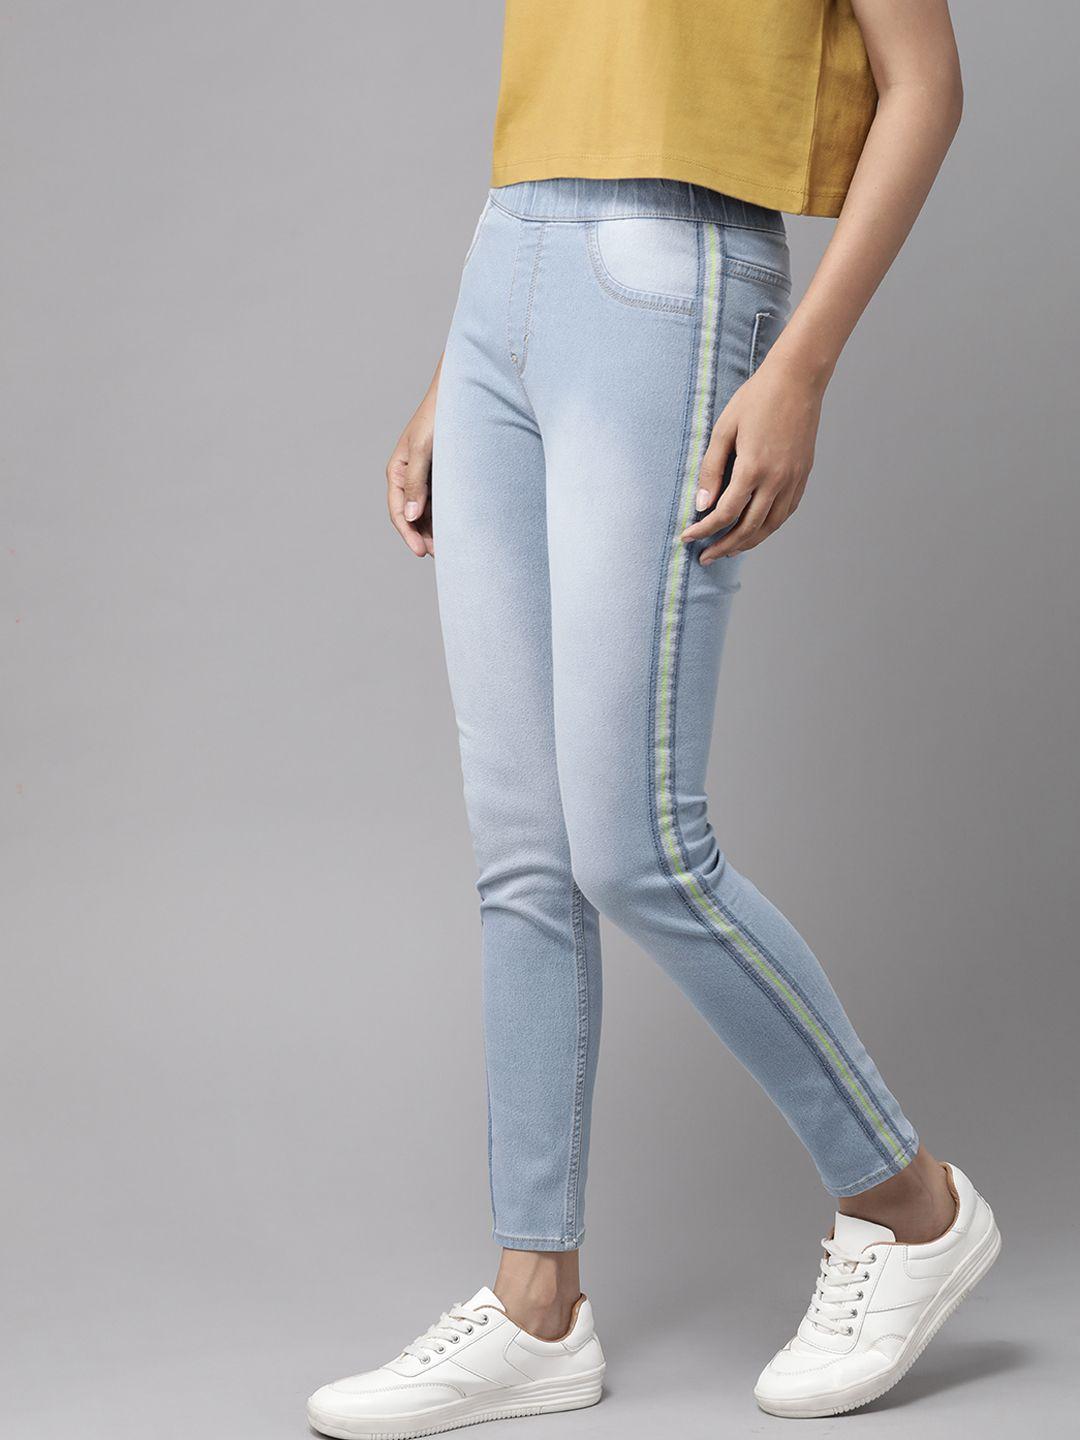 the roadster lifestyle co women blue faded jeggings with side taping detail